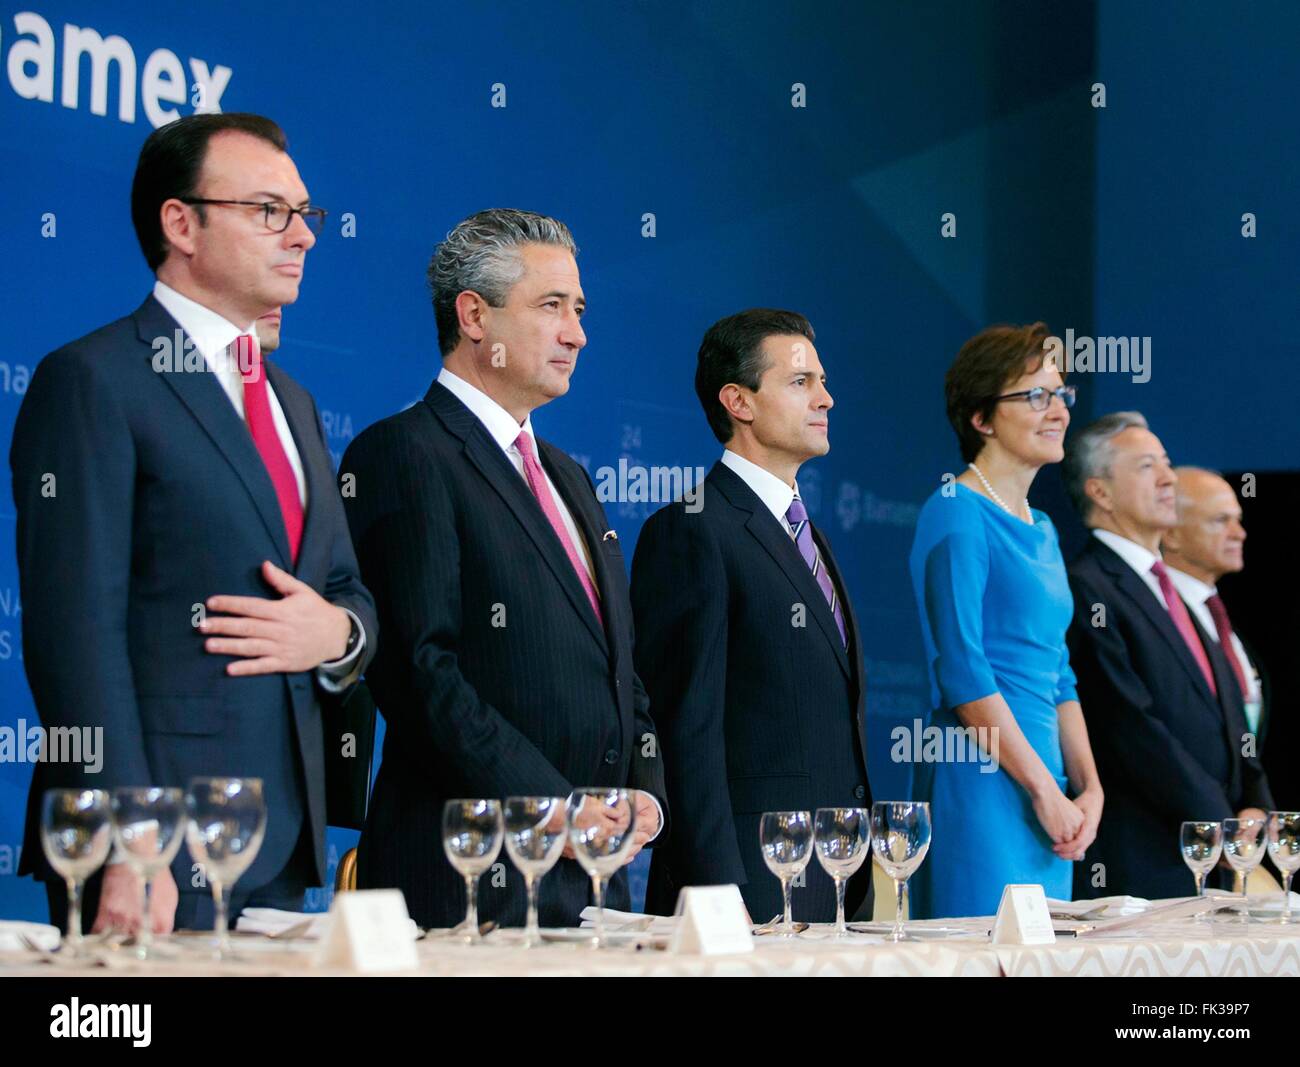 Mexican President Enrique Pena Nieto, center, stands with the Board of Directors of Banco Nacional de Mexico known as Banamex Bank at the Hyatt Hotel March 6, 2016 in Mexico City, Mexico. (L to R): Mexican Finance Minister Luis Videgaray, CEO Banamex Ernesto Torres, President Enrique Pena Nieto, CEO Citi Latin America Jane Fraser. Stock Photo